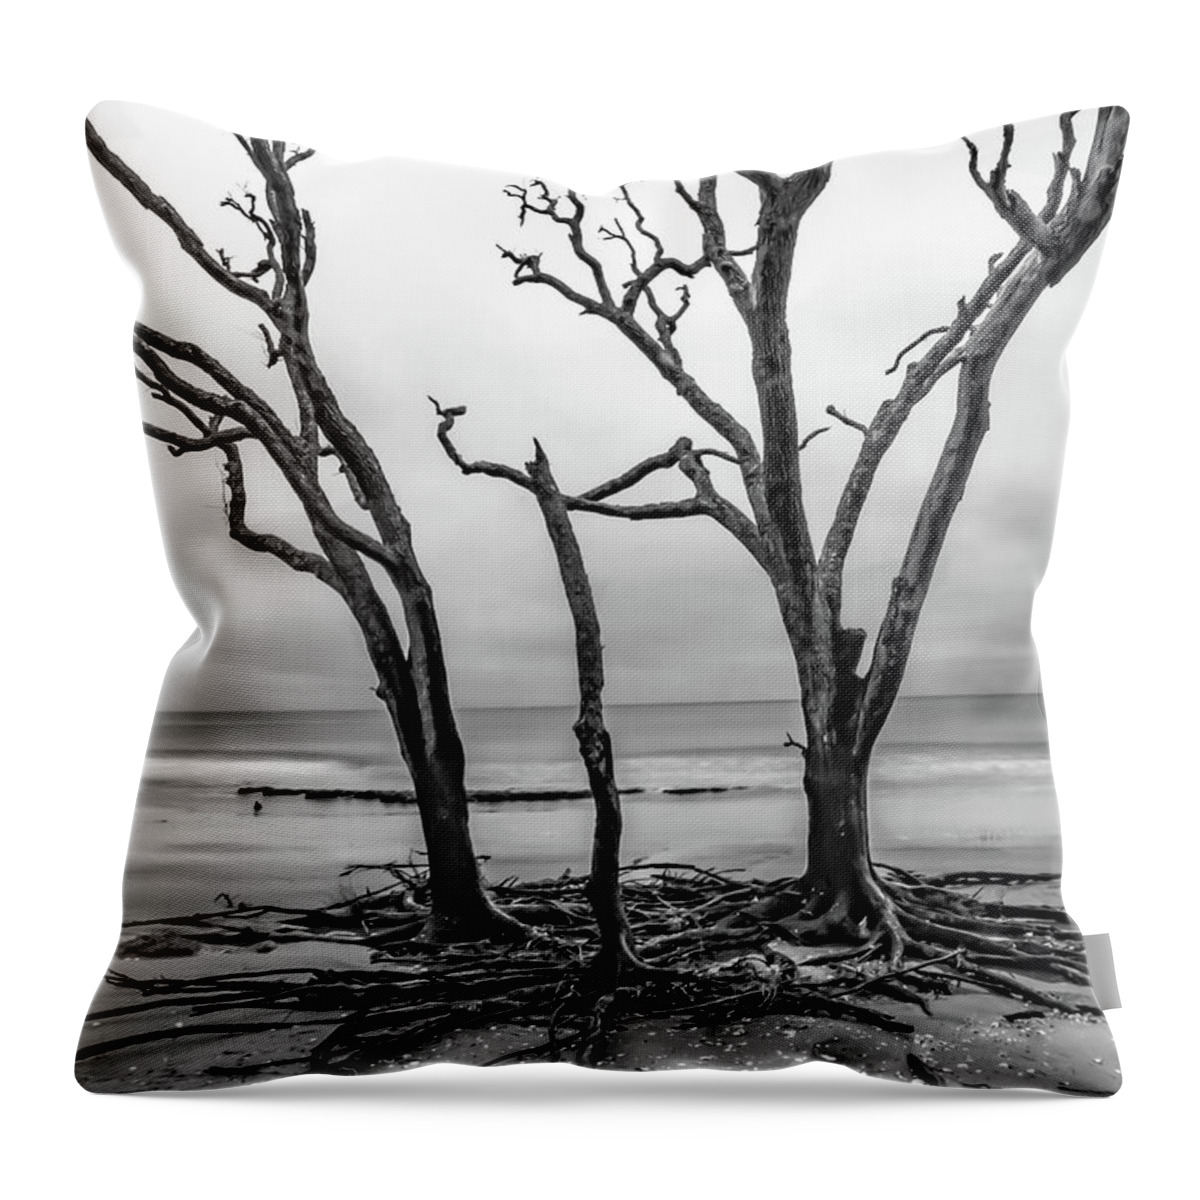 Botany Bay Throw Pillow featuring the photograph Botany Bay Trifecta by Norma Brandsberg